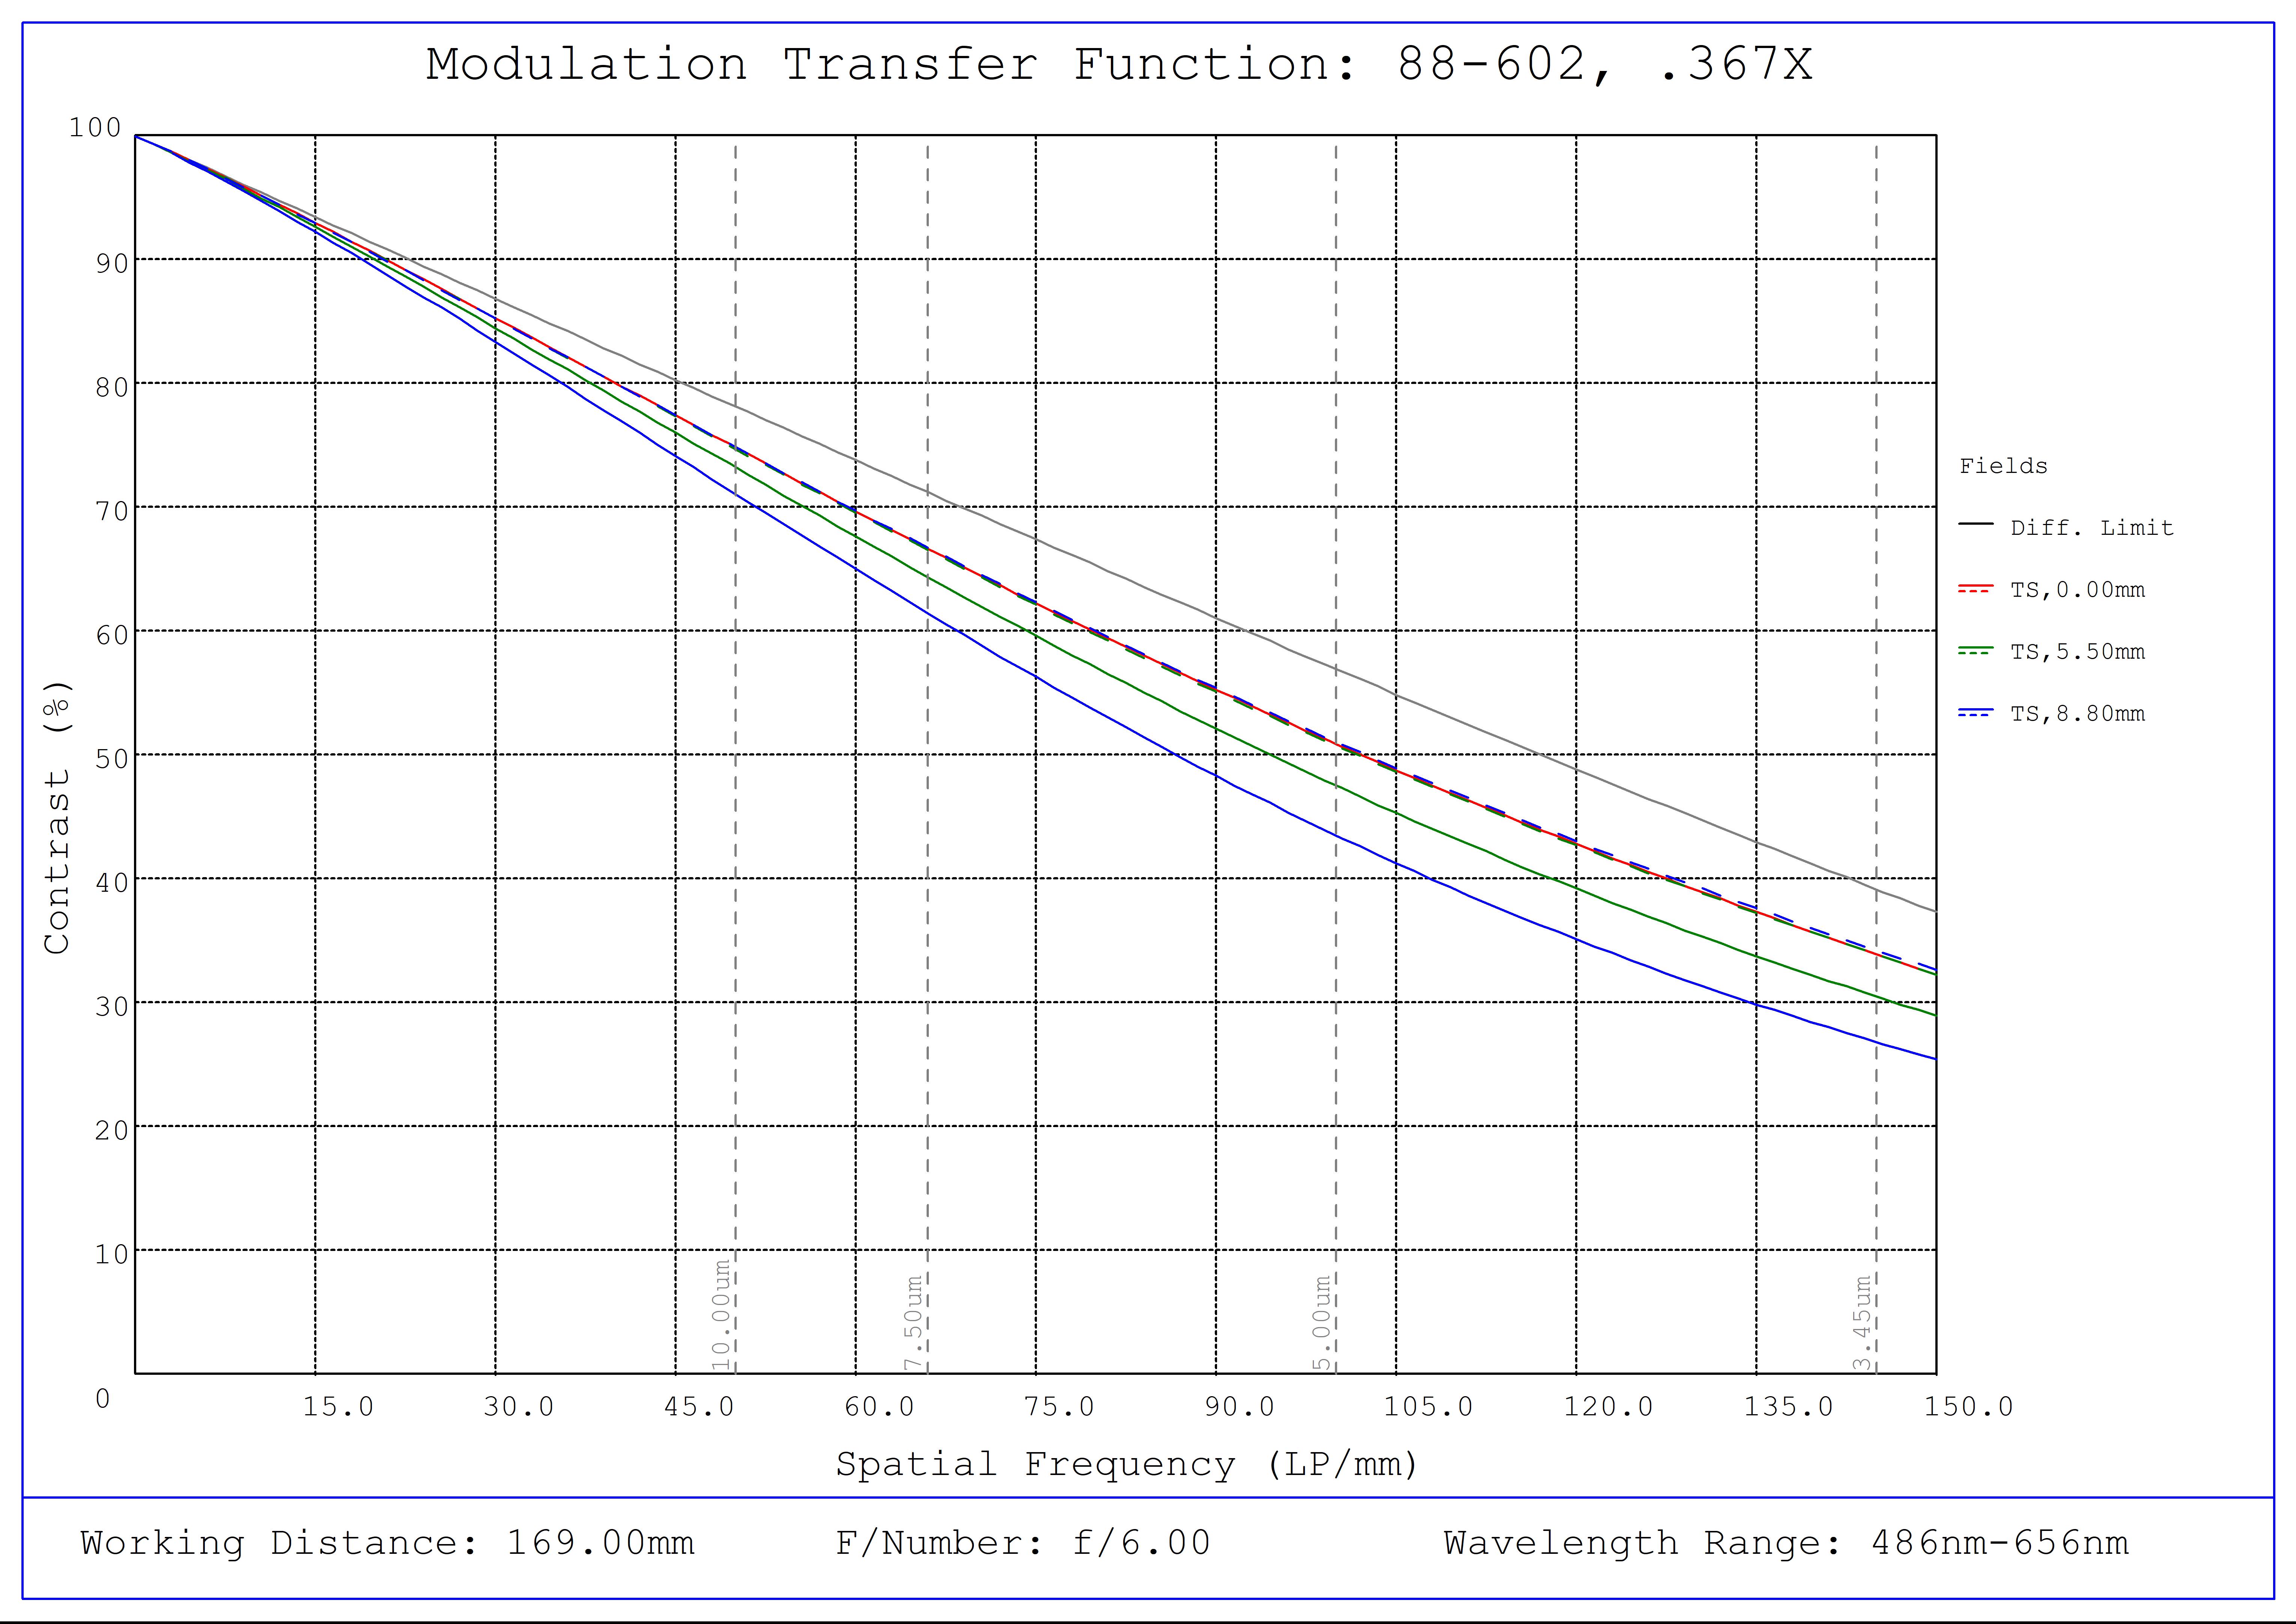 #88-602, 0.367X CobaltTL Telecentric Lens, Modulated Transfer Function (MTF) Plot, 169mm Working Distance, f6